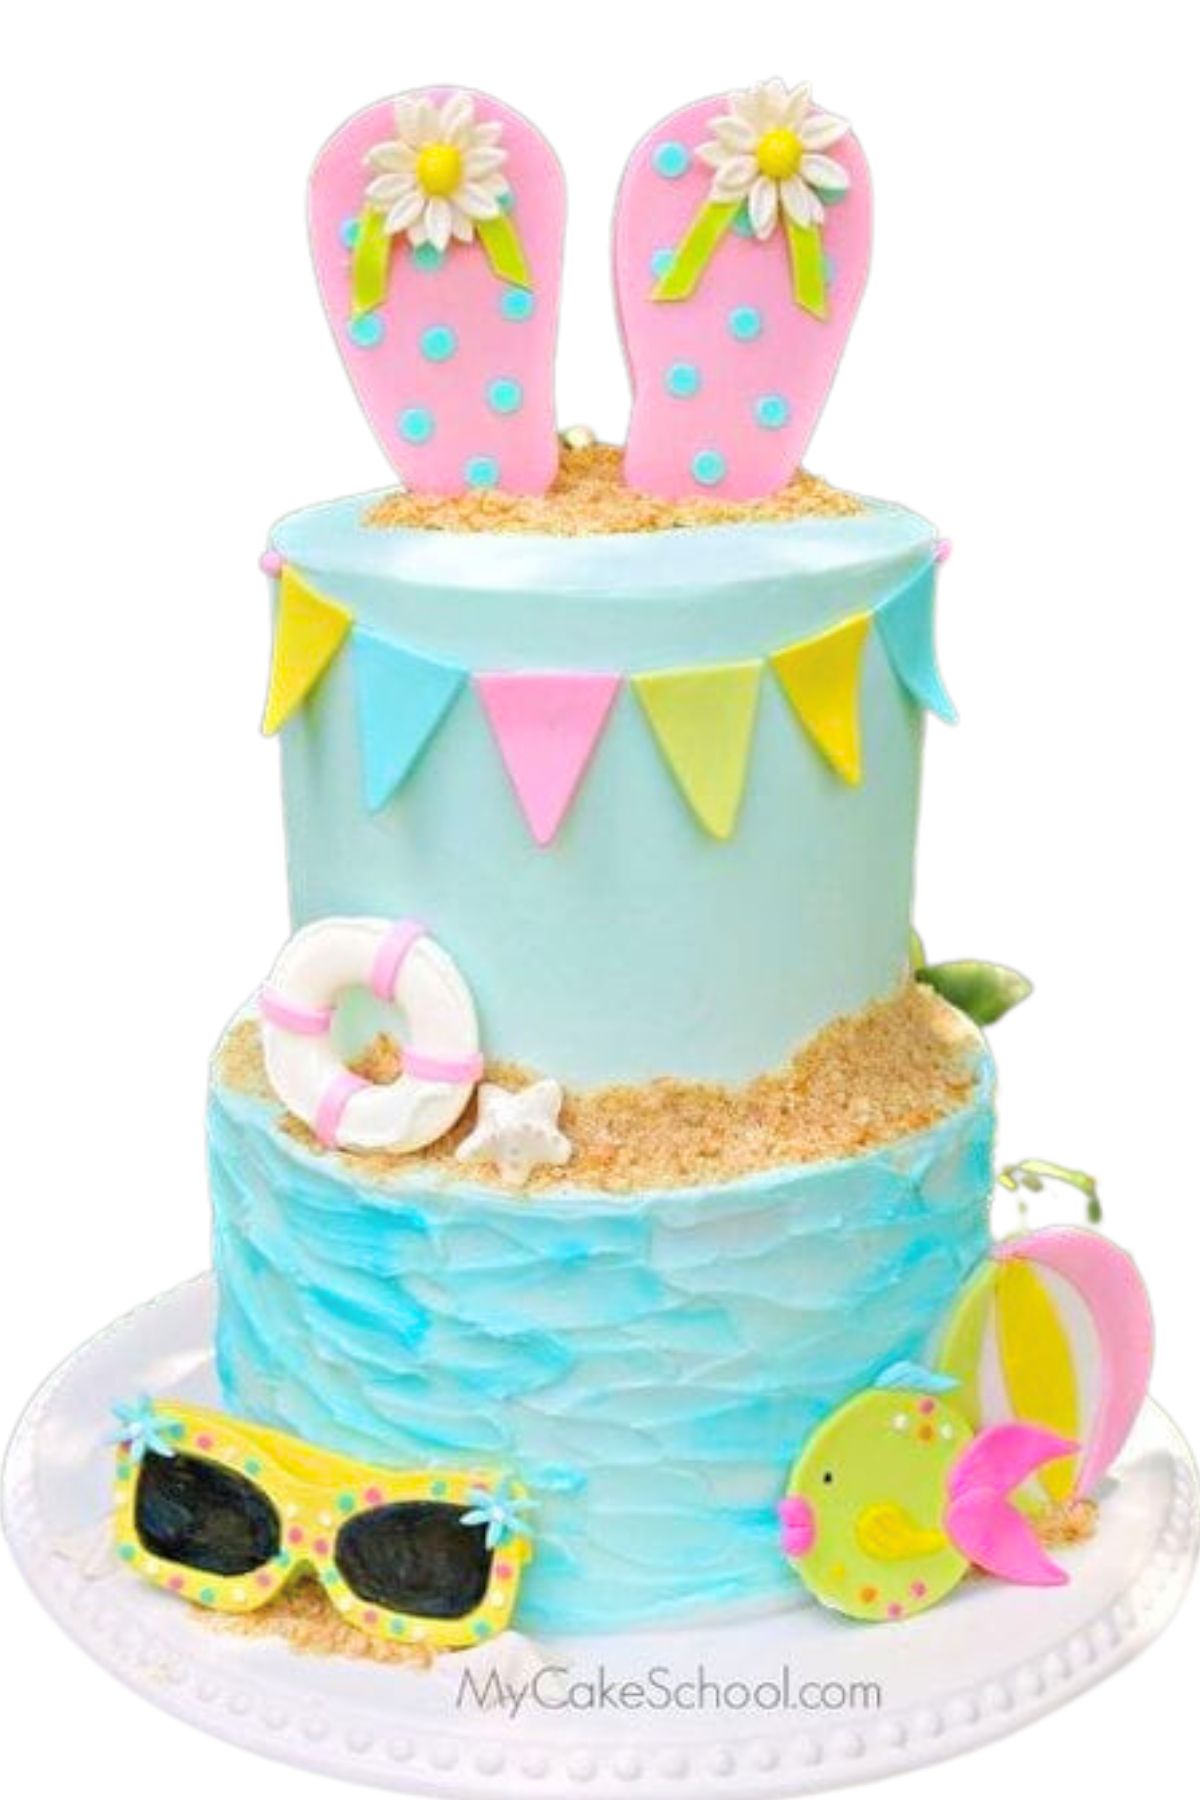 Two Tiered Beach Cake with flip flop cake topper.